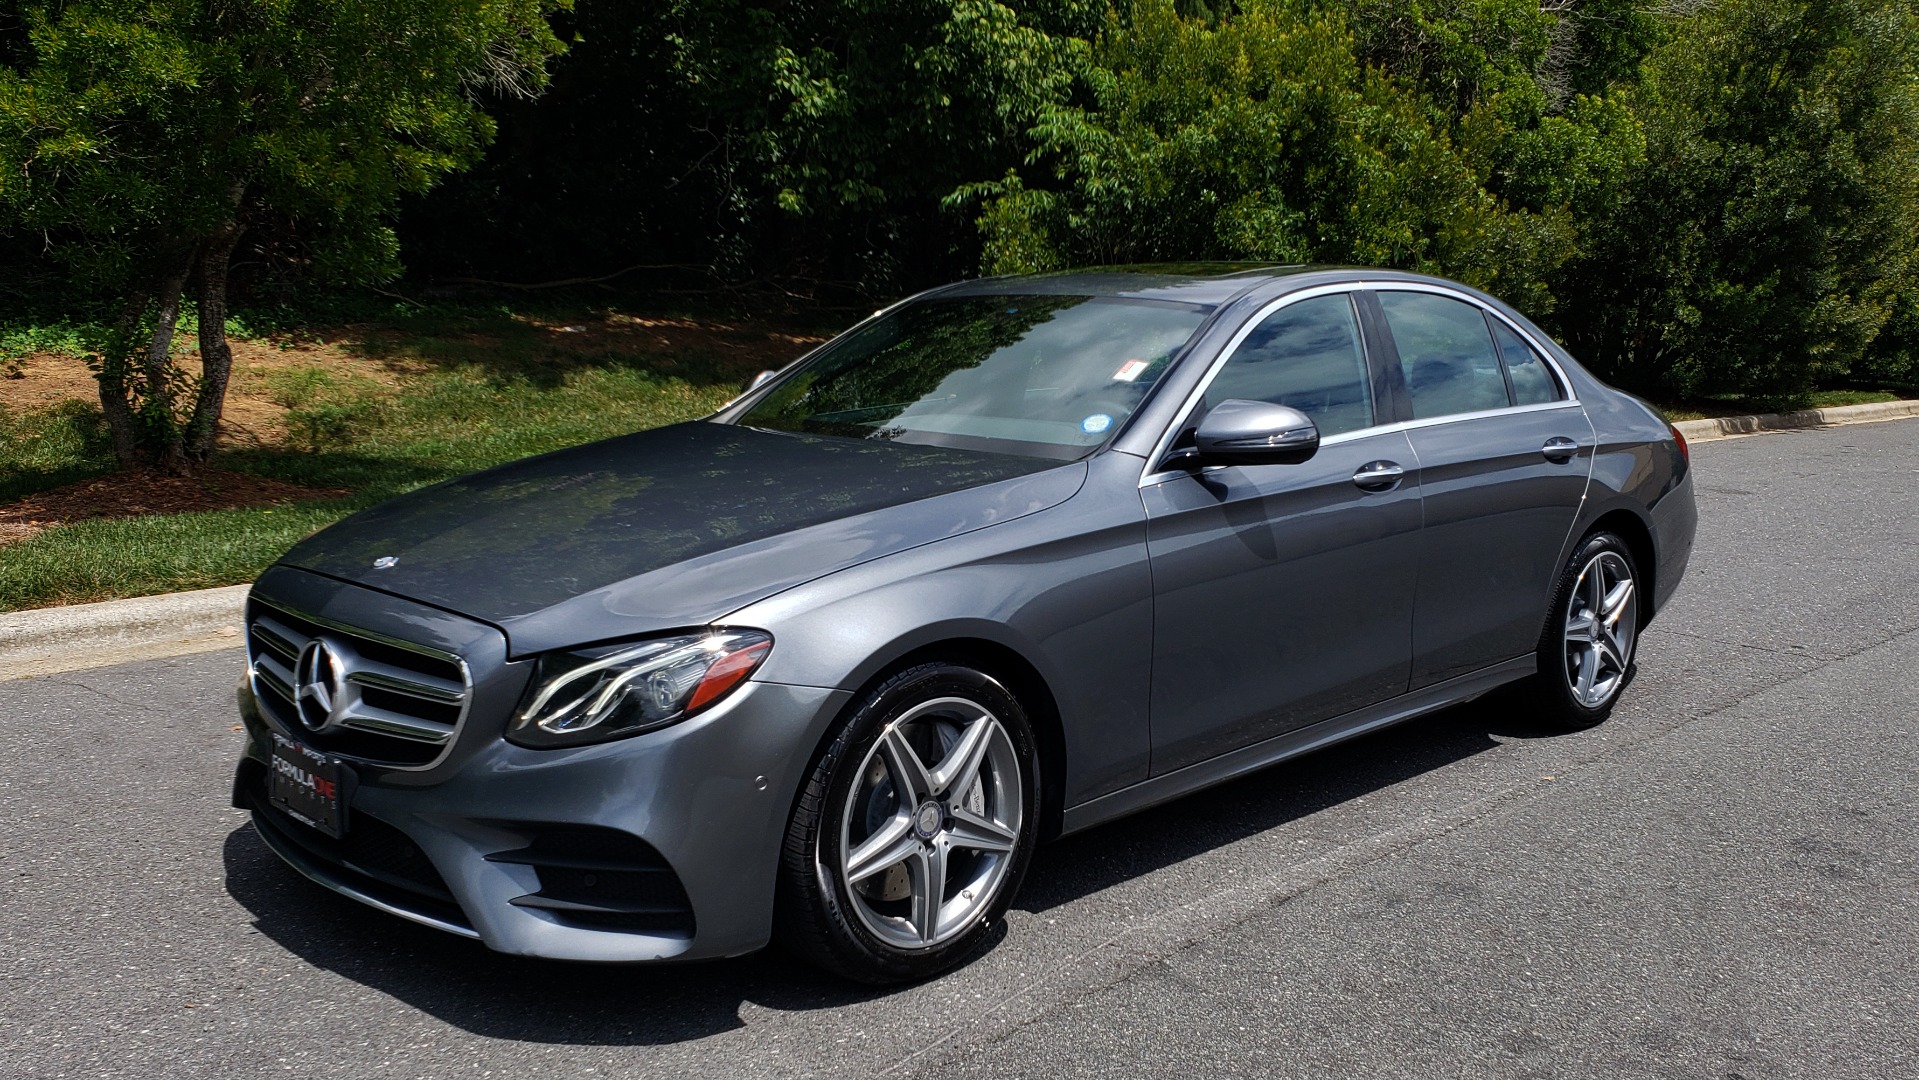 Used 2017 Mercedes-Benz E-CLASS E 300 SPORT 4MATIC / PREM PKG / NAV / SUNROOF / BURMESTER SND / REARVIEW for sale Sold at Formula Imports in Charlotte NC 28227 1